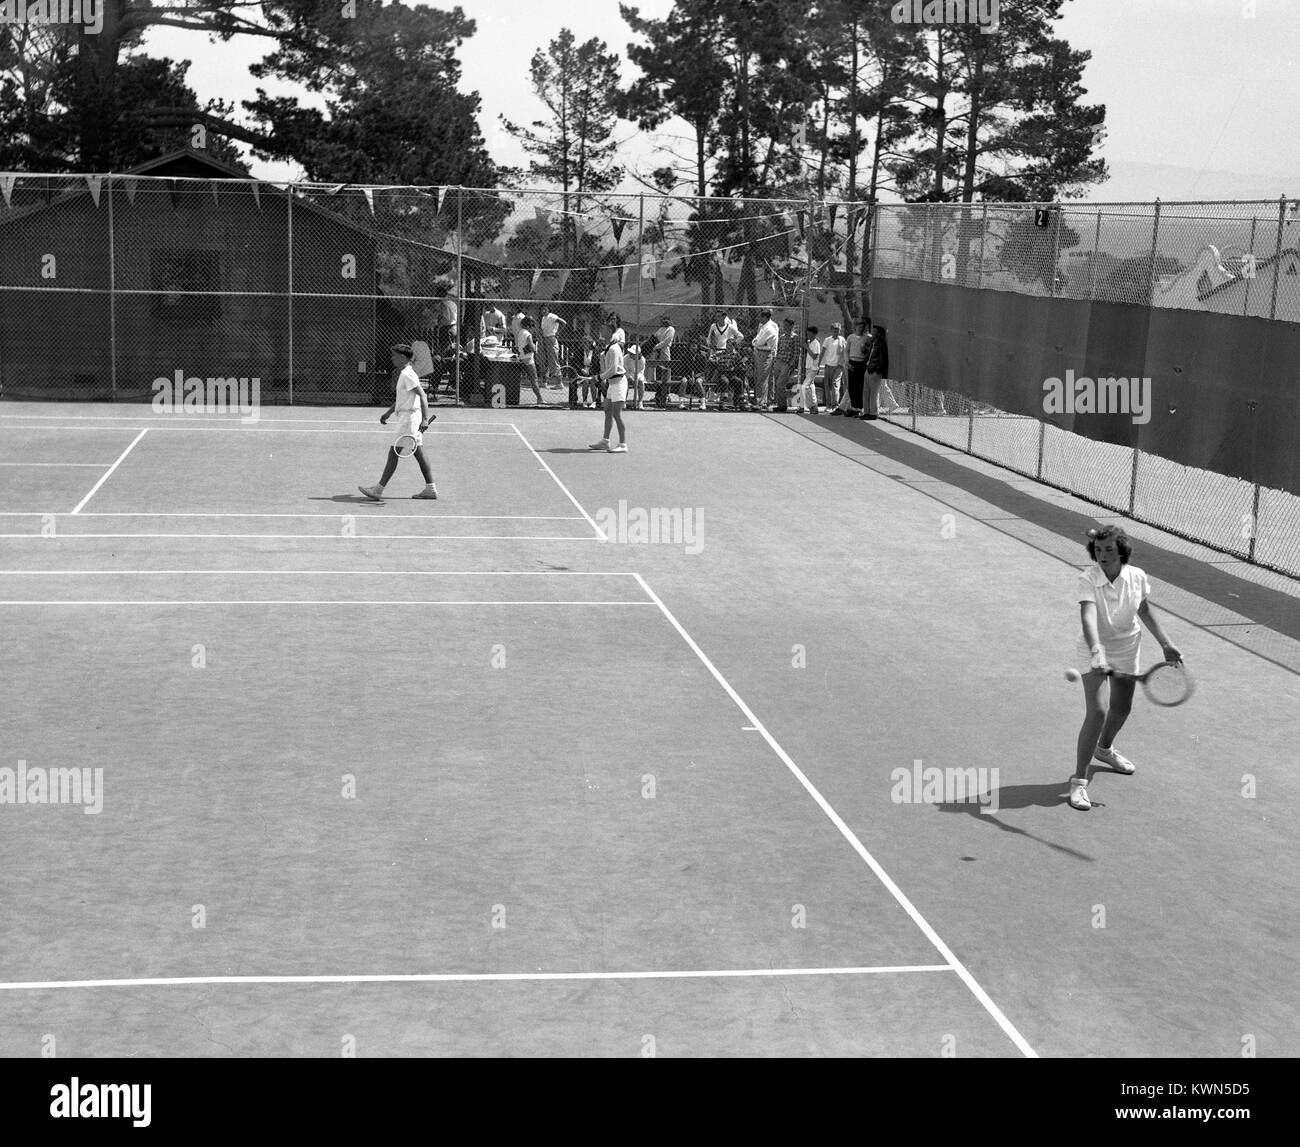 A young woman hits a tennis ball while several young men play tennis on a court behind her, Monterey, California, 1950. Stock Photo